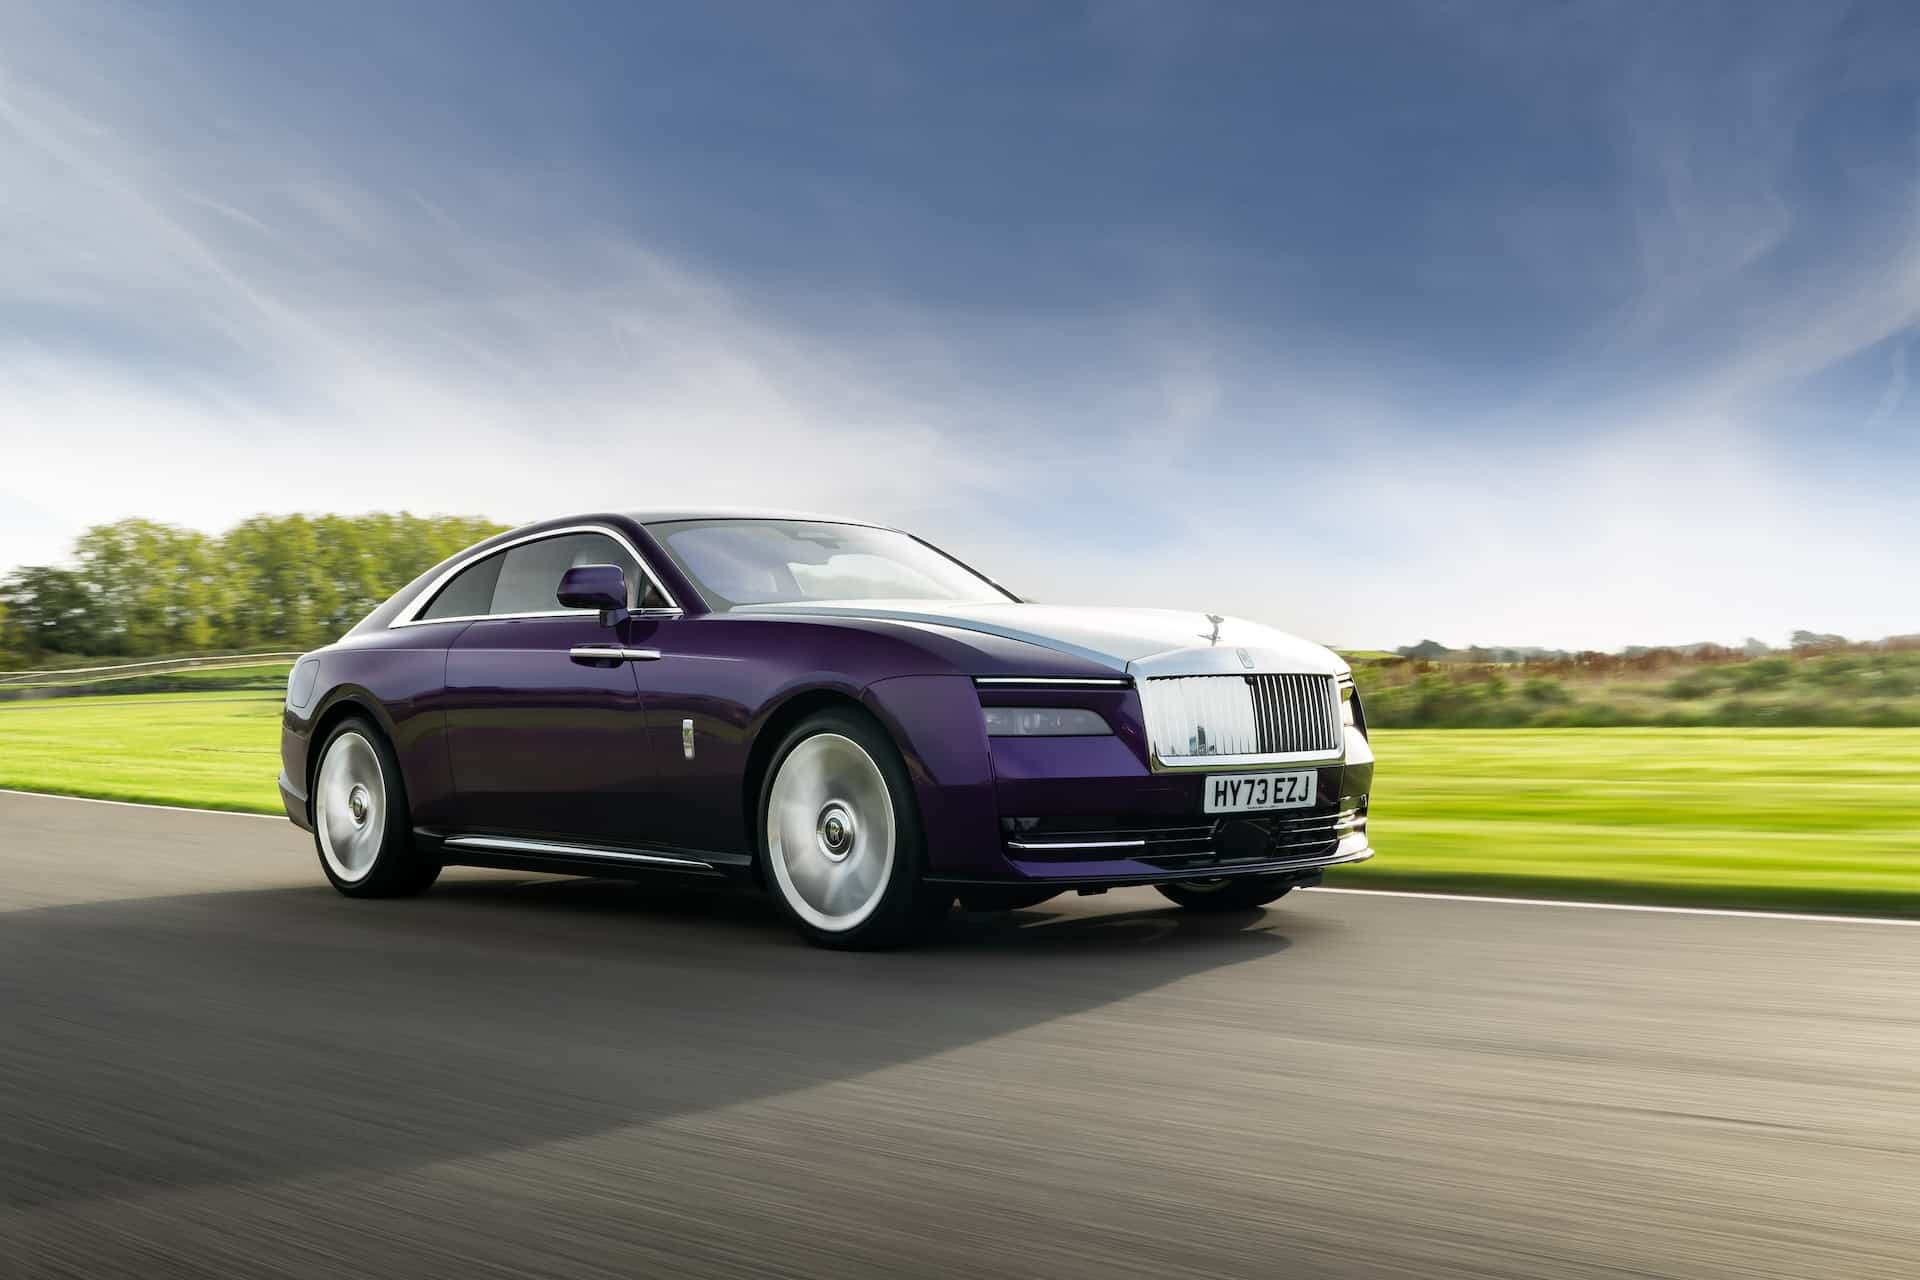 “Spectre” Media Drive: Rolls-Royce Introduces New Electric Vehicle